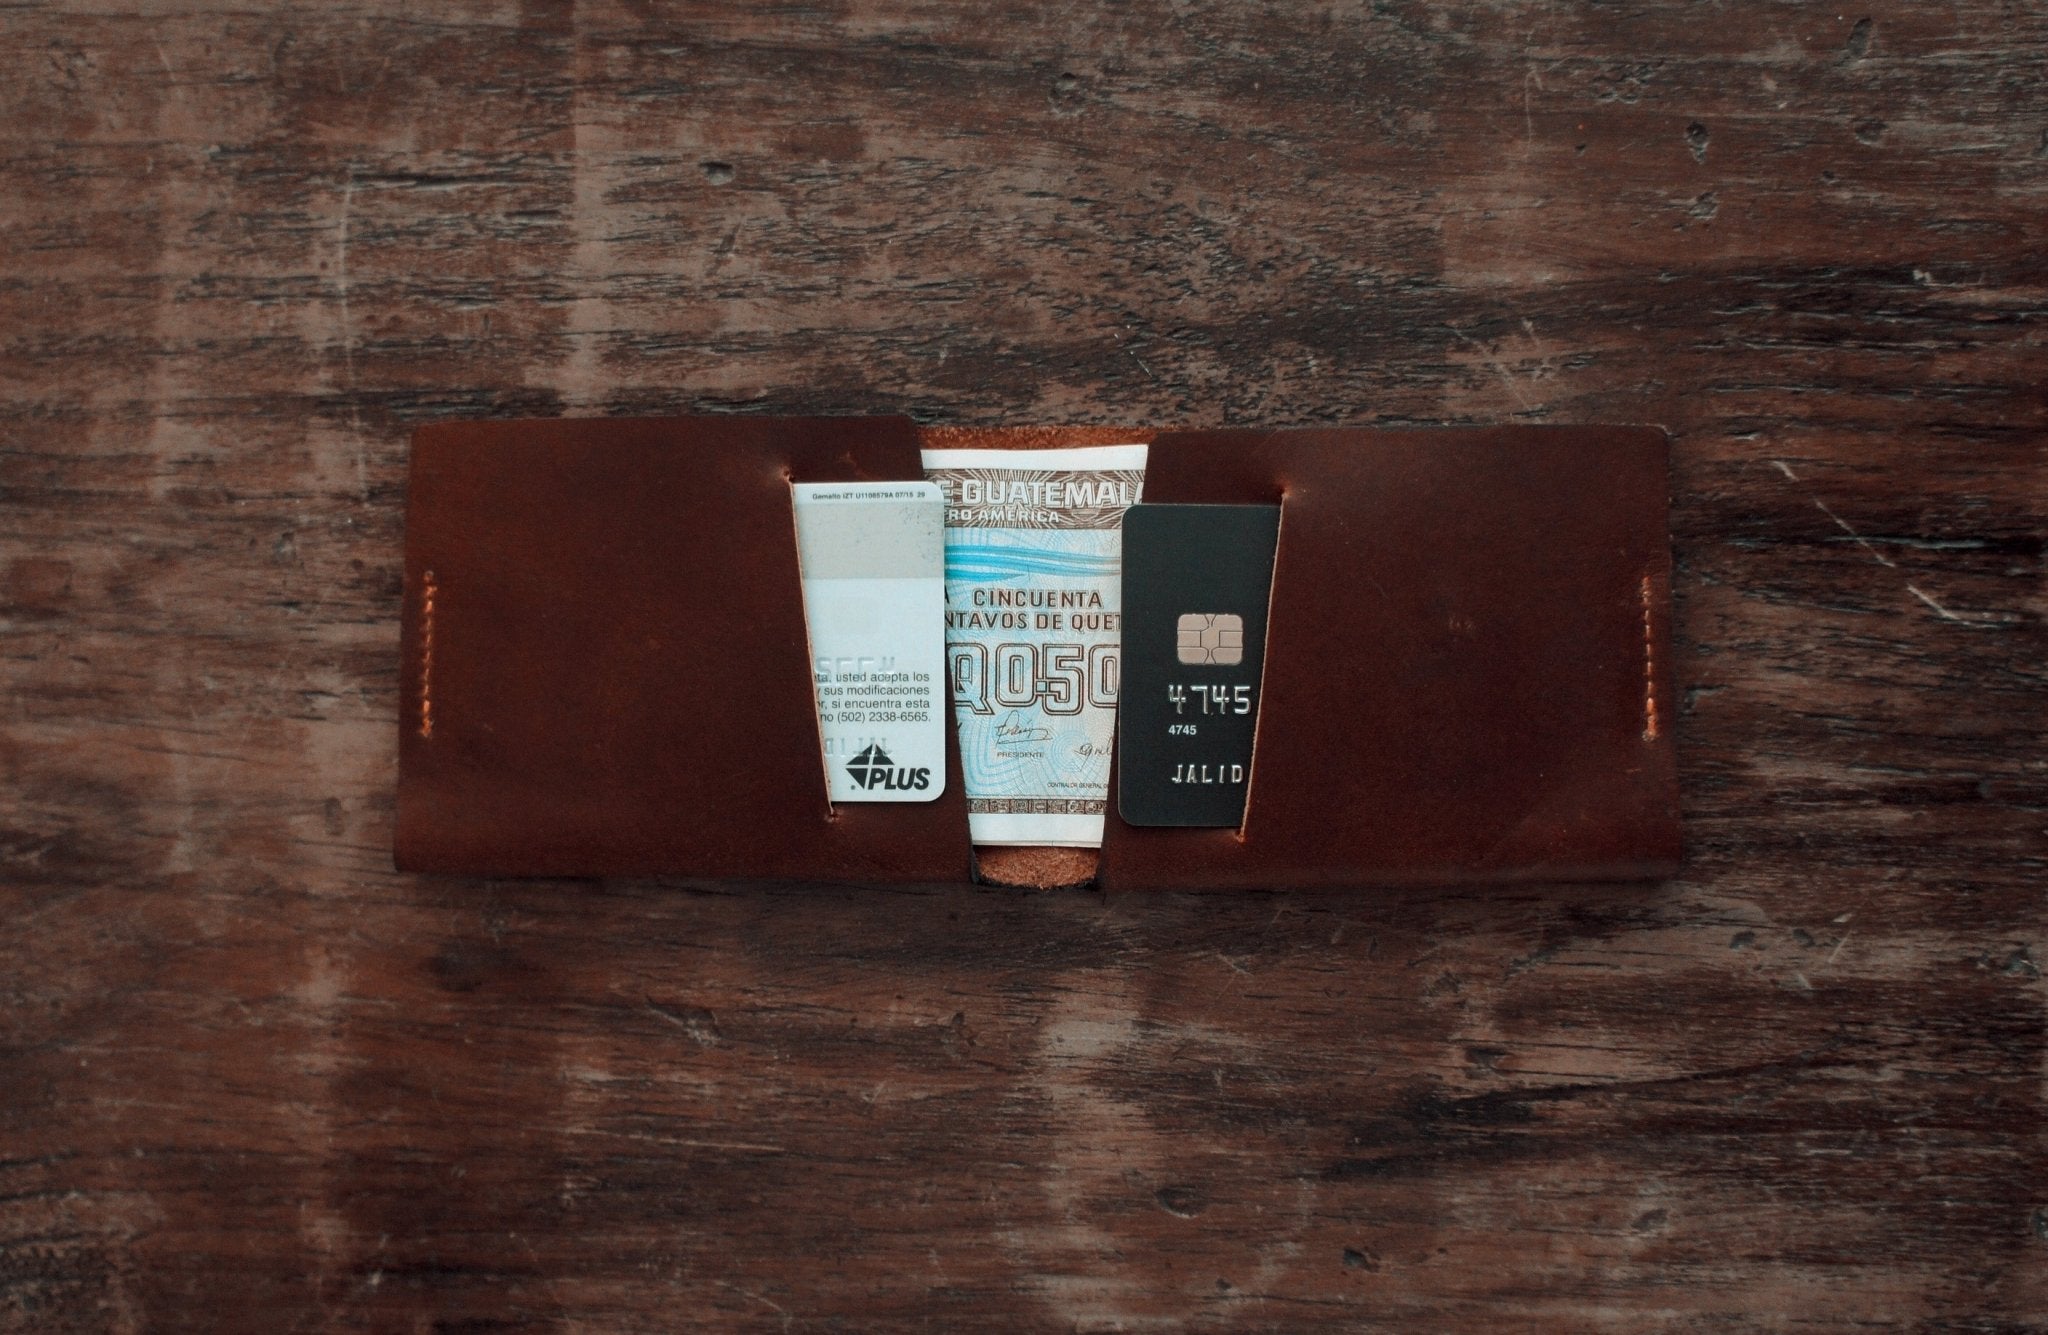 The Slim Wallet - SIMPLE Leather Goods